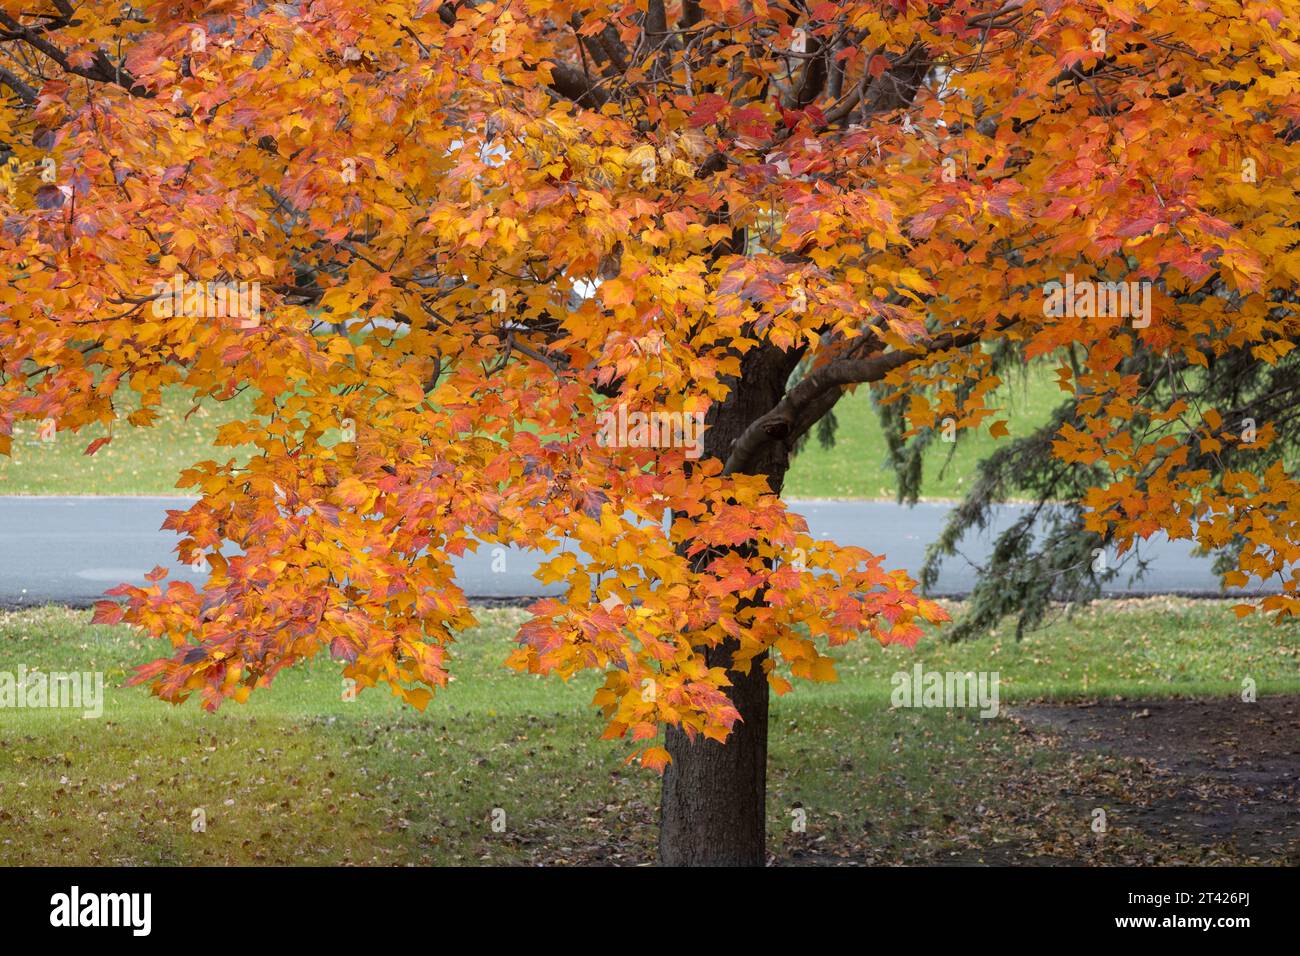 Full frame abstract texture background of red and orange color leaves on a red maple (acer rubrum) tree in autumn Stock Photo